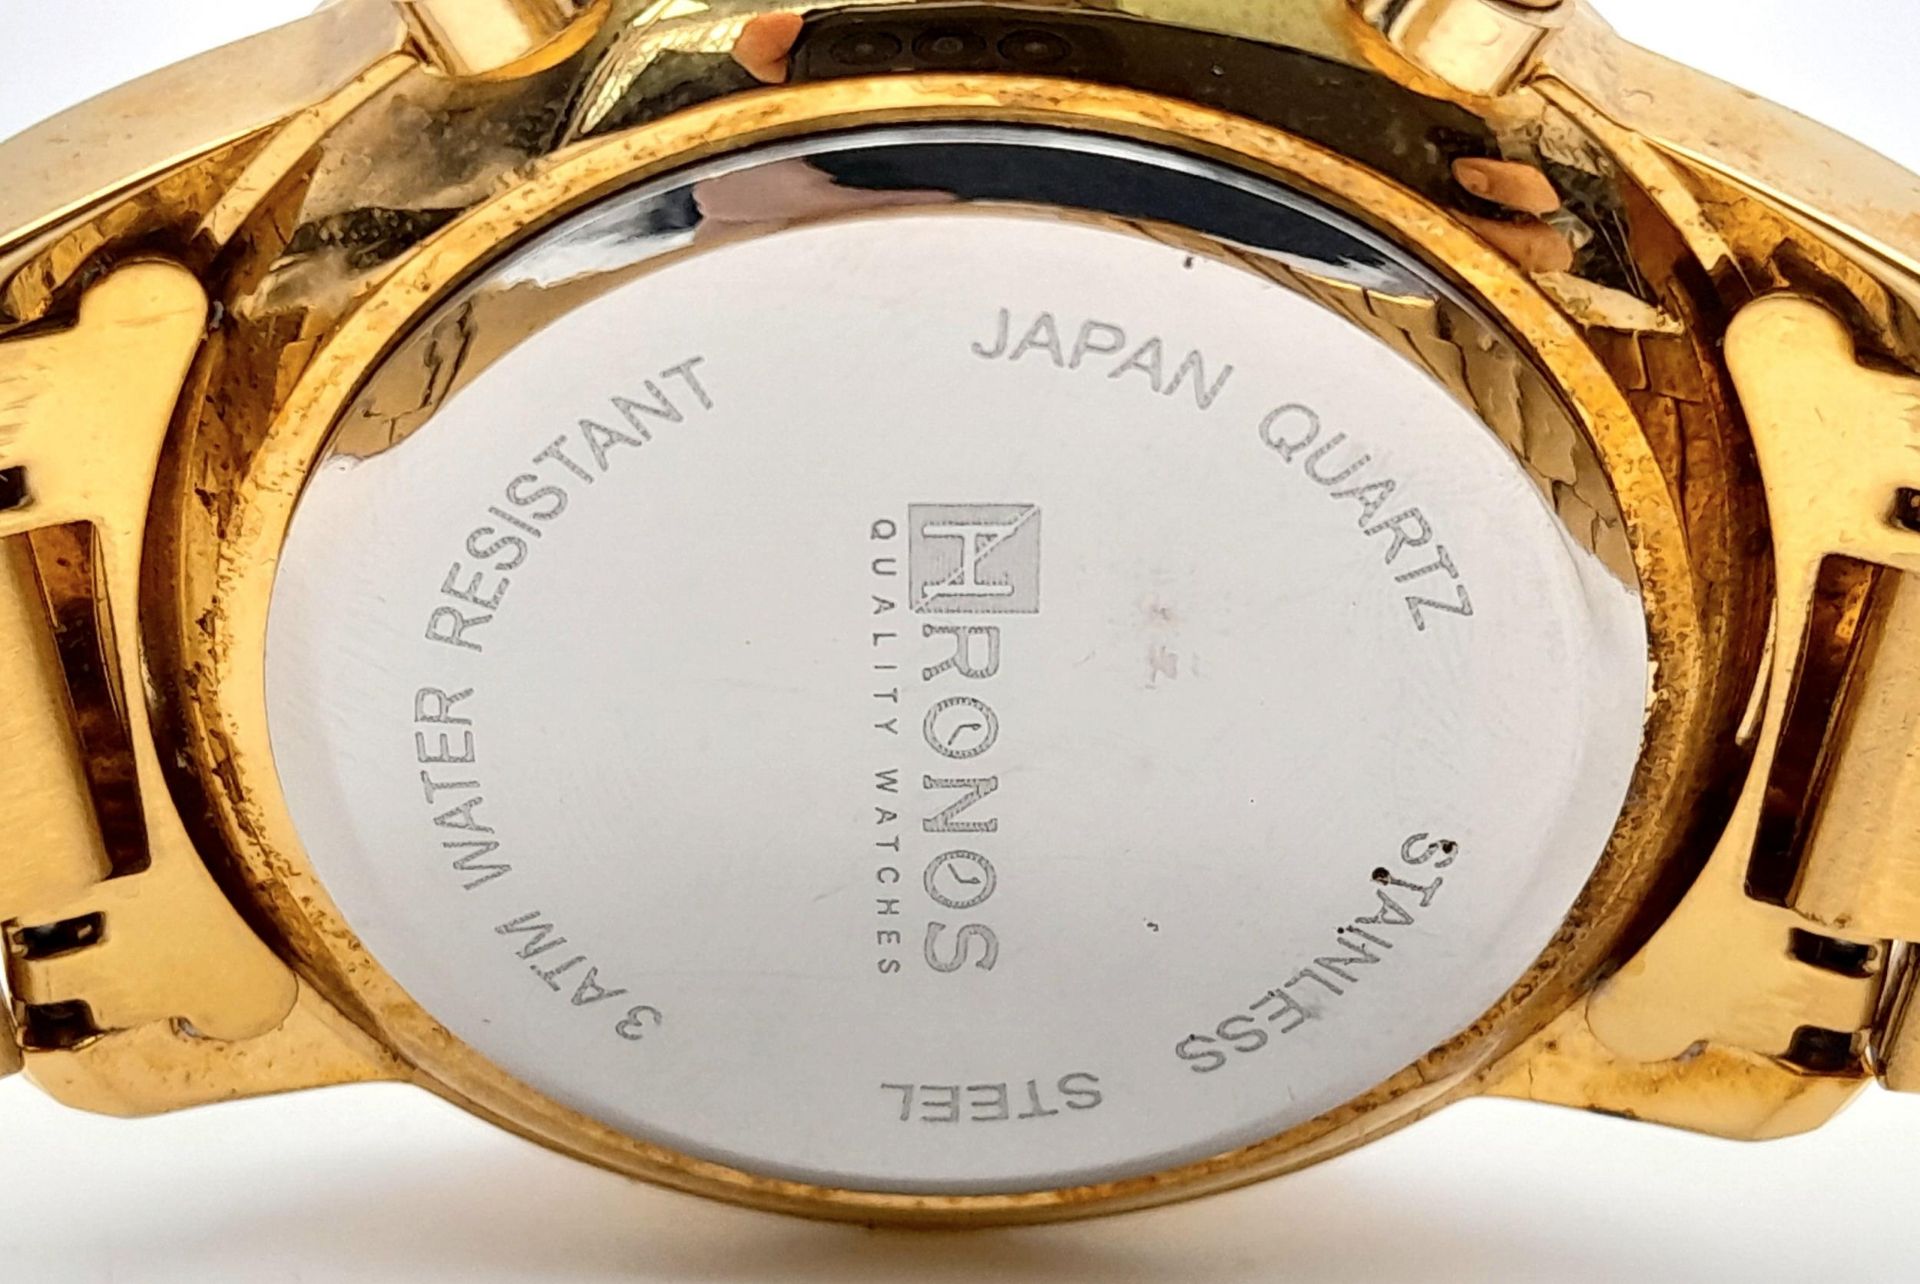 An Excellent Condition Men’s Gold Tone Japanese Sports Chronograph Date Watch by Hronos. 42mm - Bild 5 aus 6